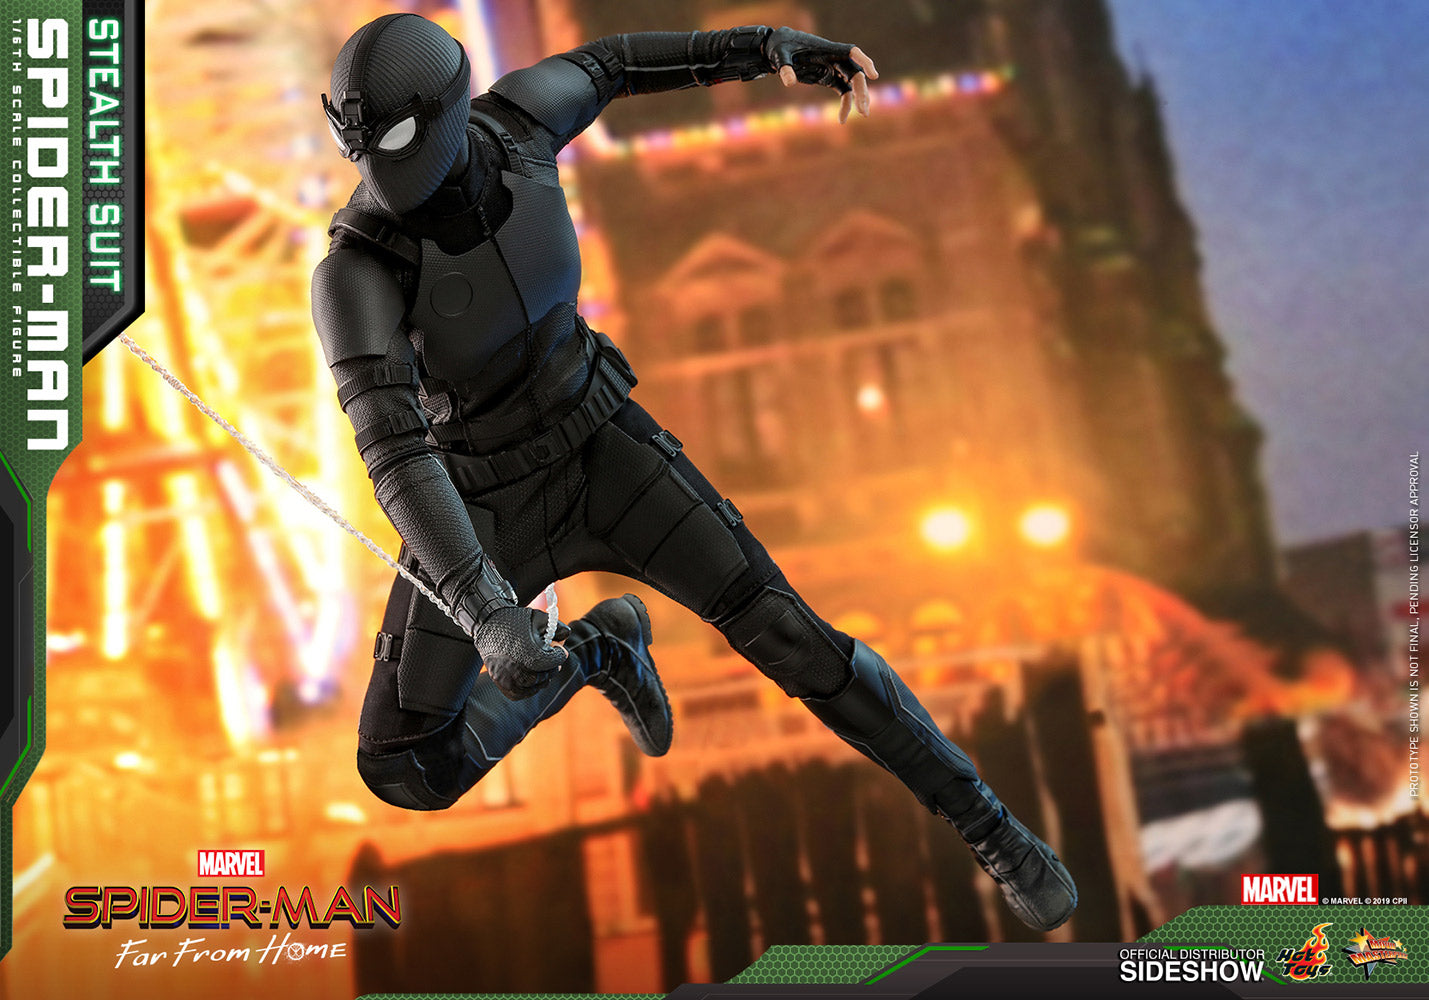 Spider-man (Stealth Suit) - Spider-man: Far From Home - Sixth Scale Figure by Hot Toys